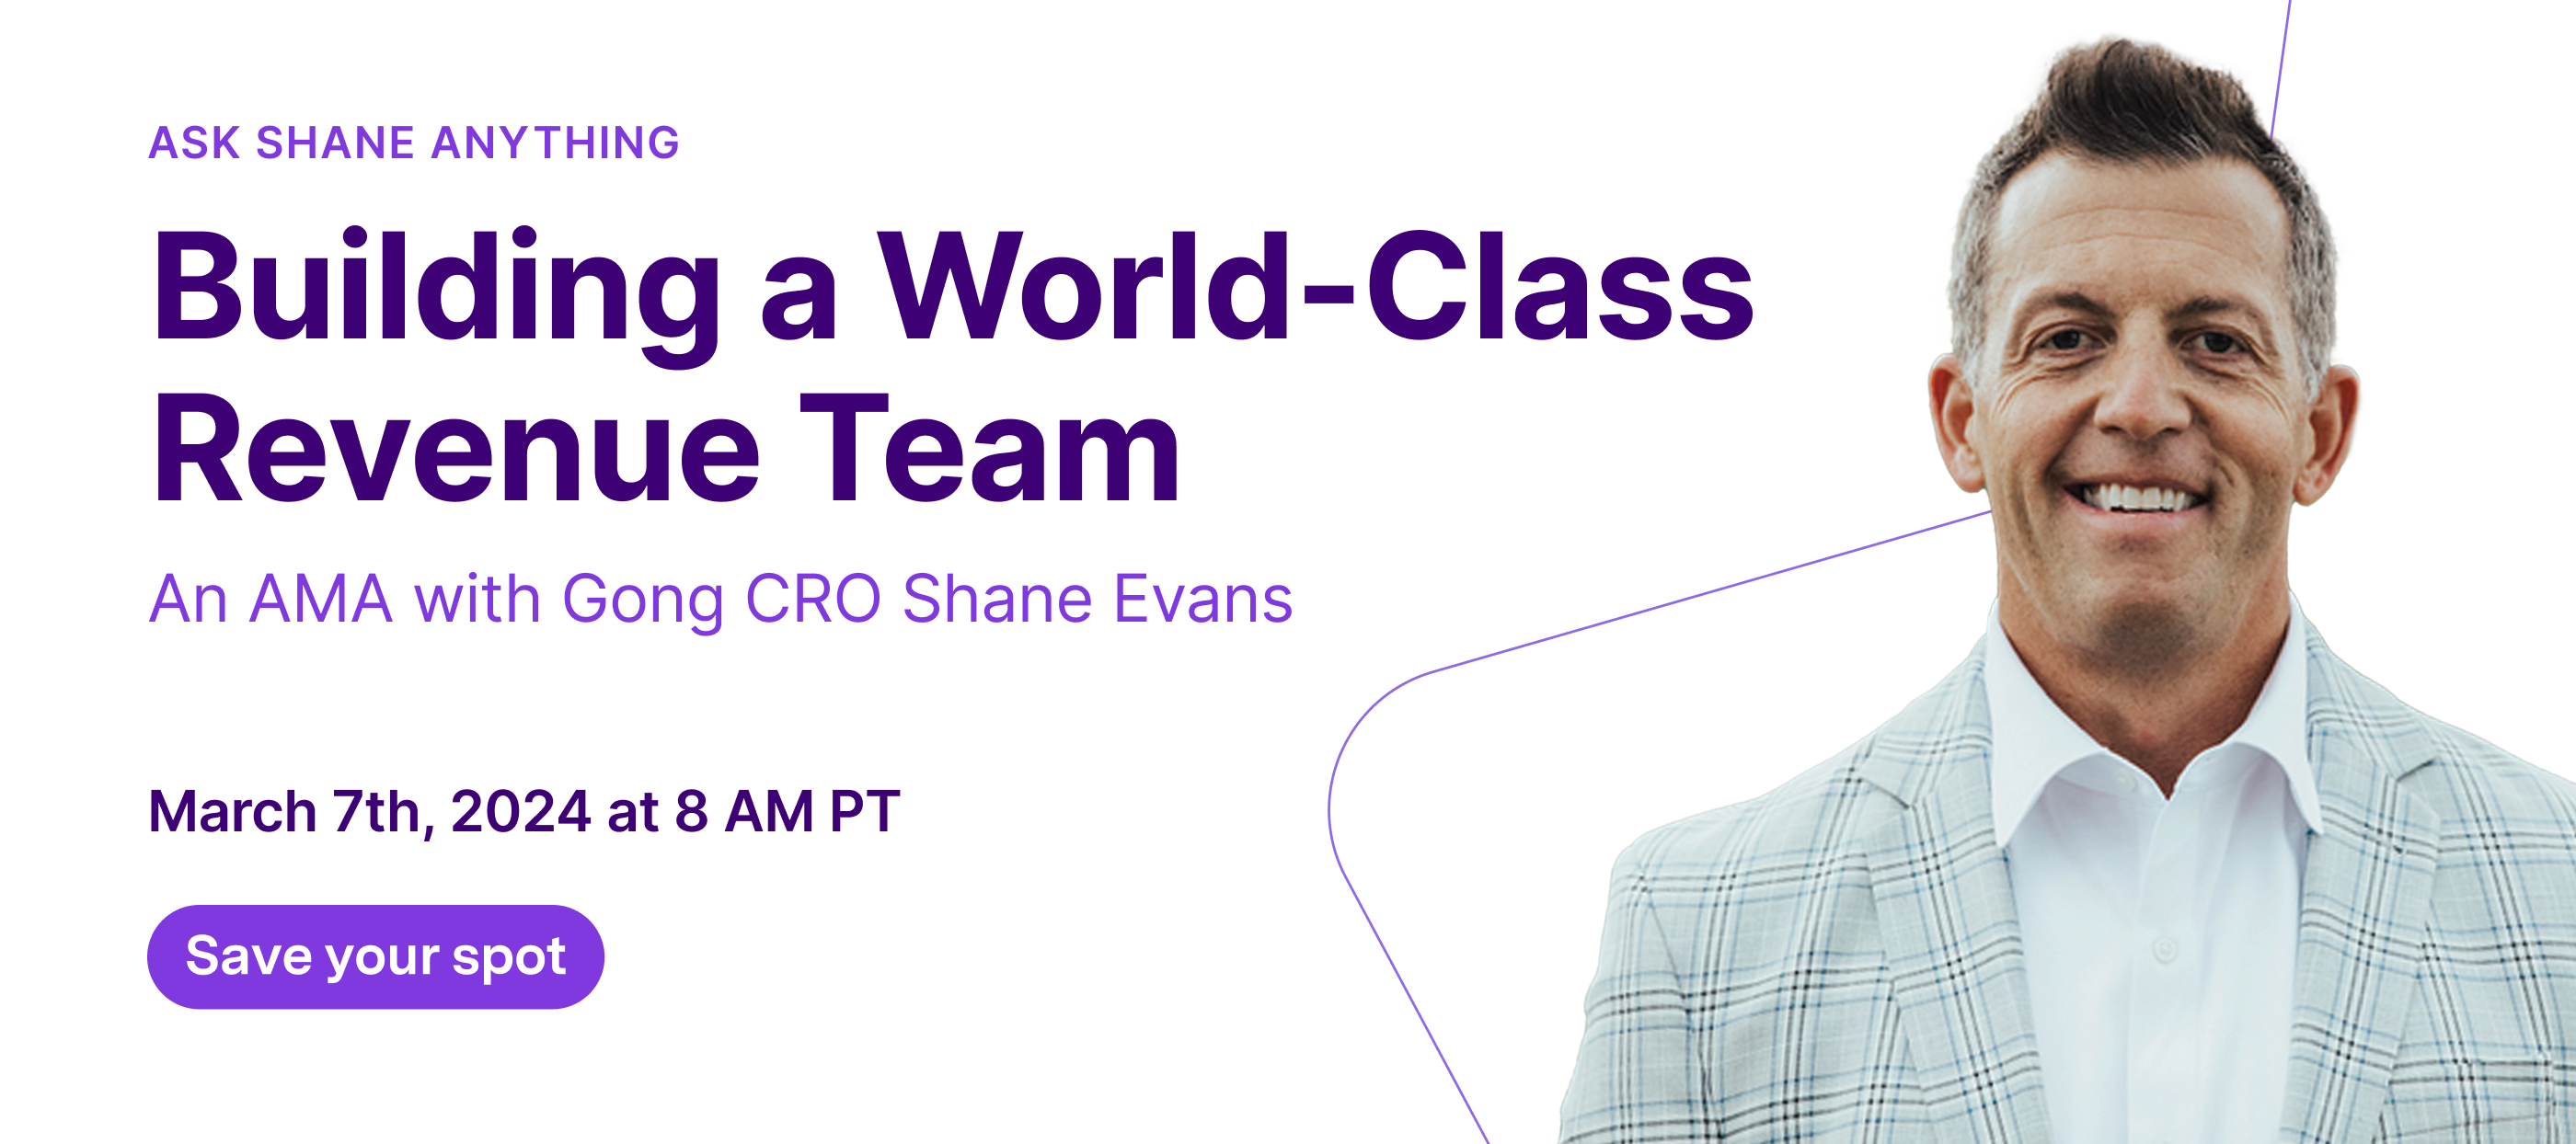 YOU’RE INVITED: Ask Shane anything about building a world-class revenue team